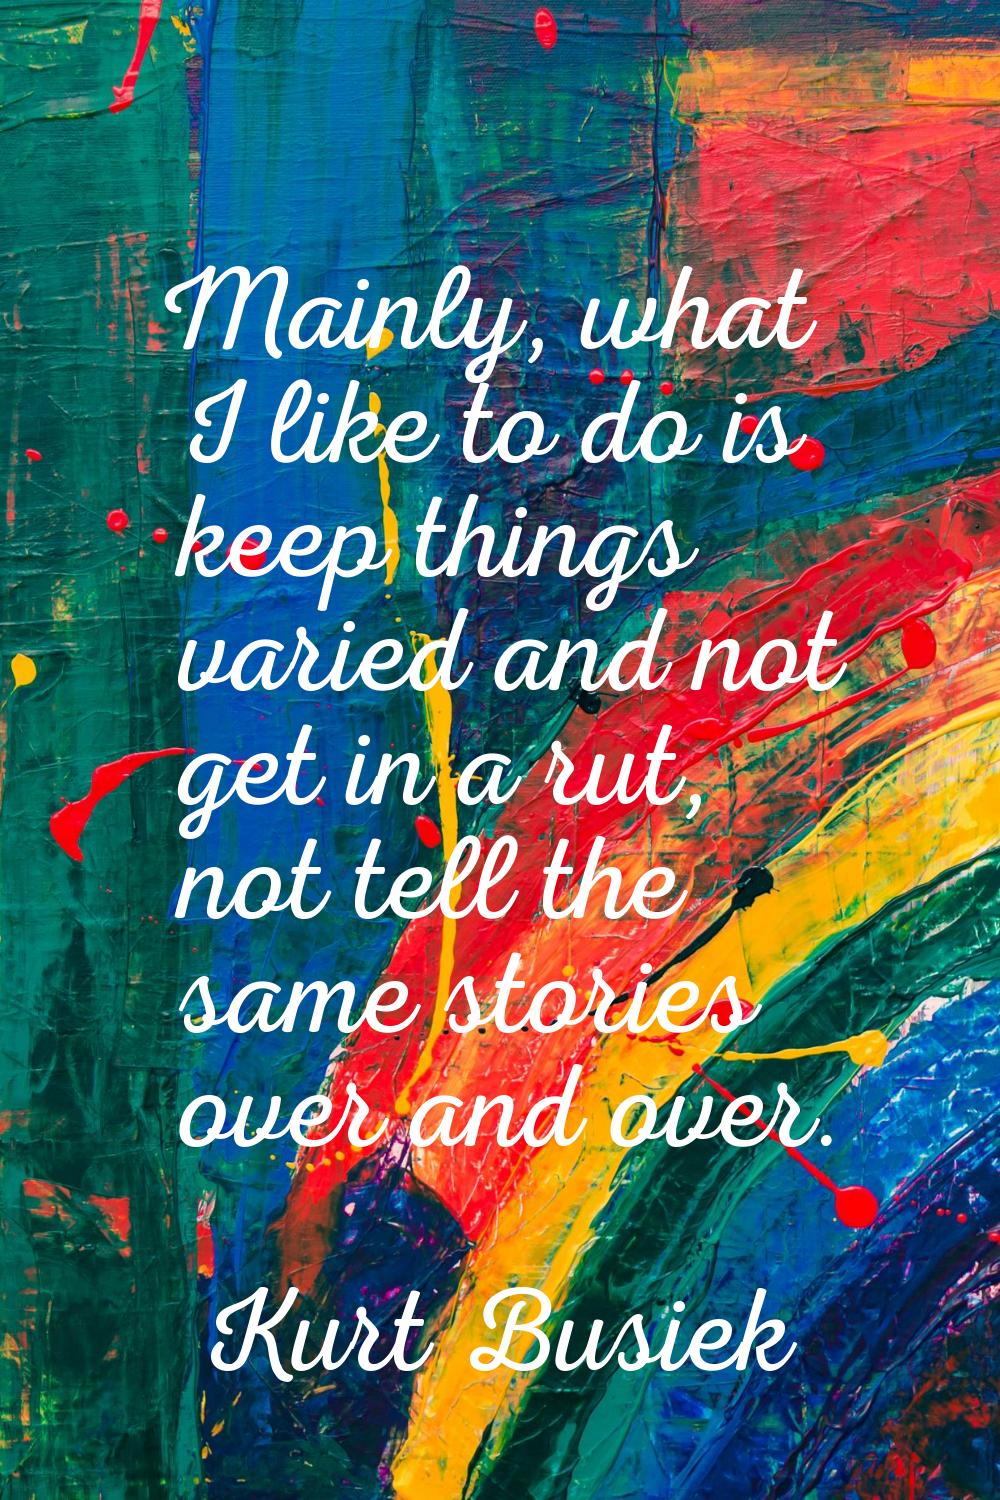 Mainly, what I like to do is keep things varied and not get in a rut, not tell the same stories ove